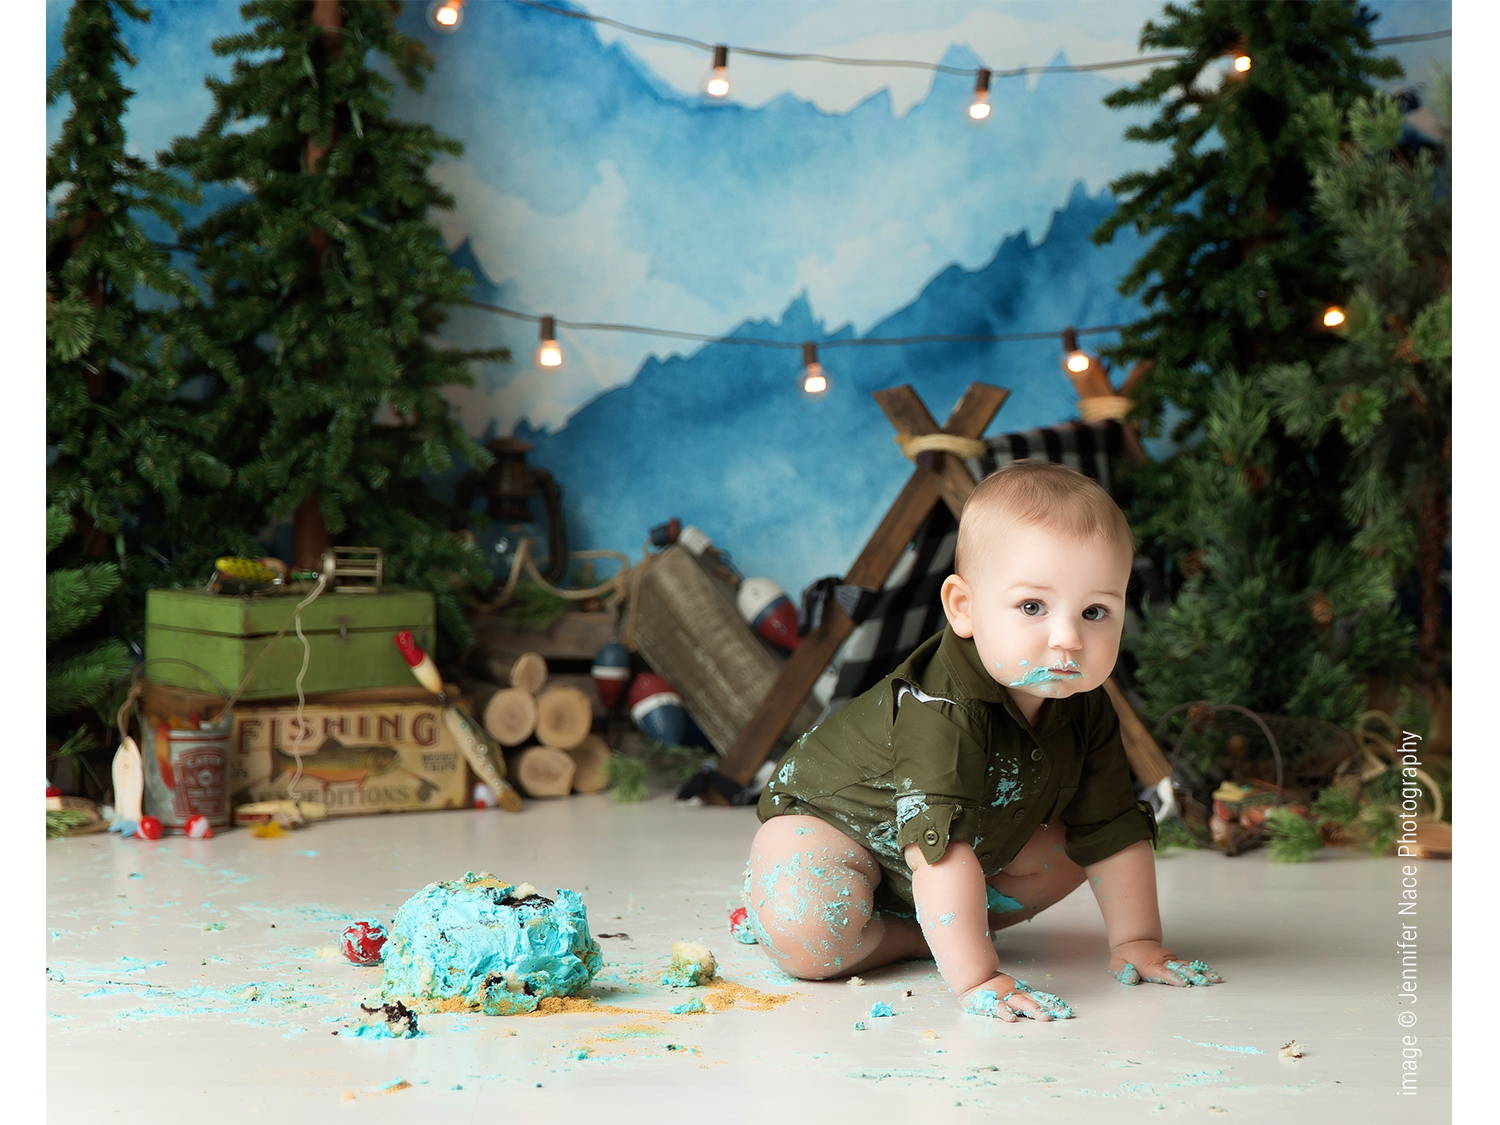 Gone Fishin' - Photography Backdrop by Intuition Backgrounds